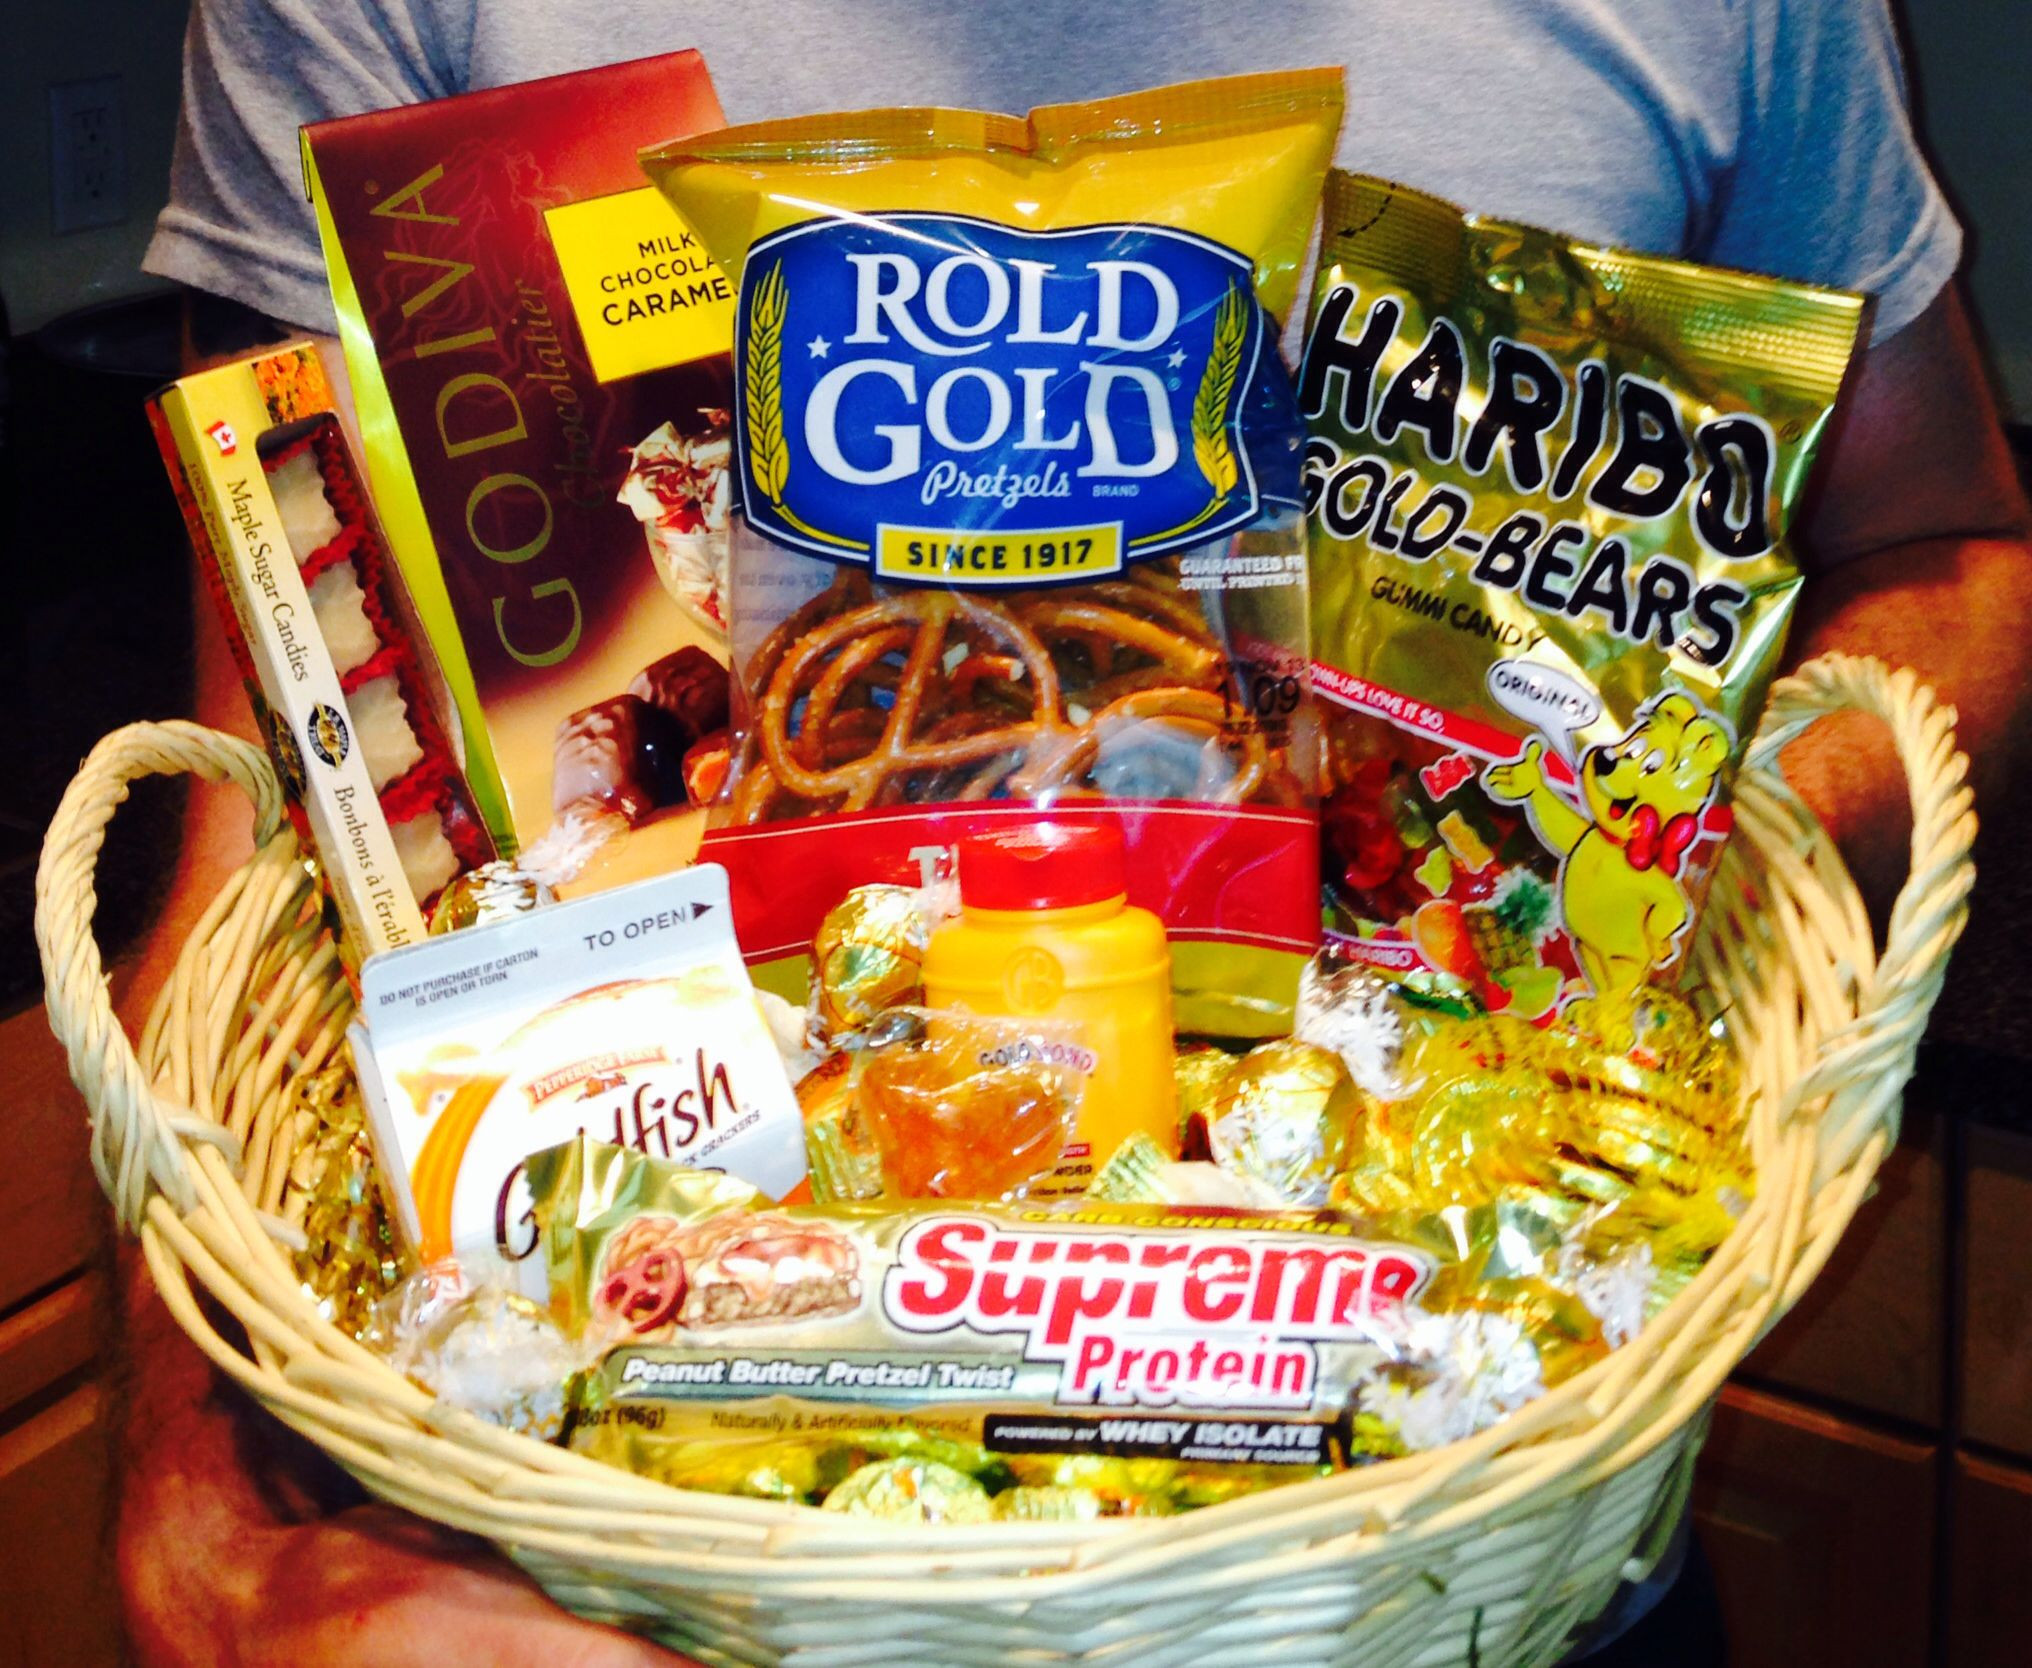 Golden Birthday Party Ideas
 Basket of "gold" for a Golden Birthday t when you turn